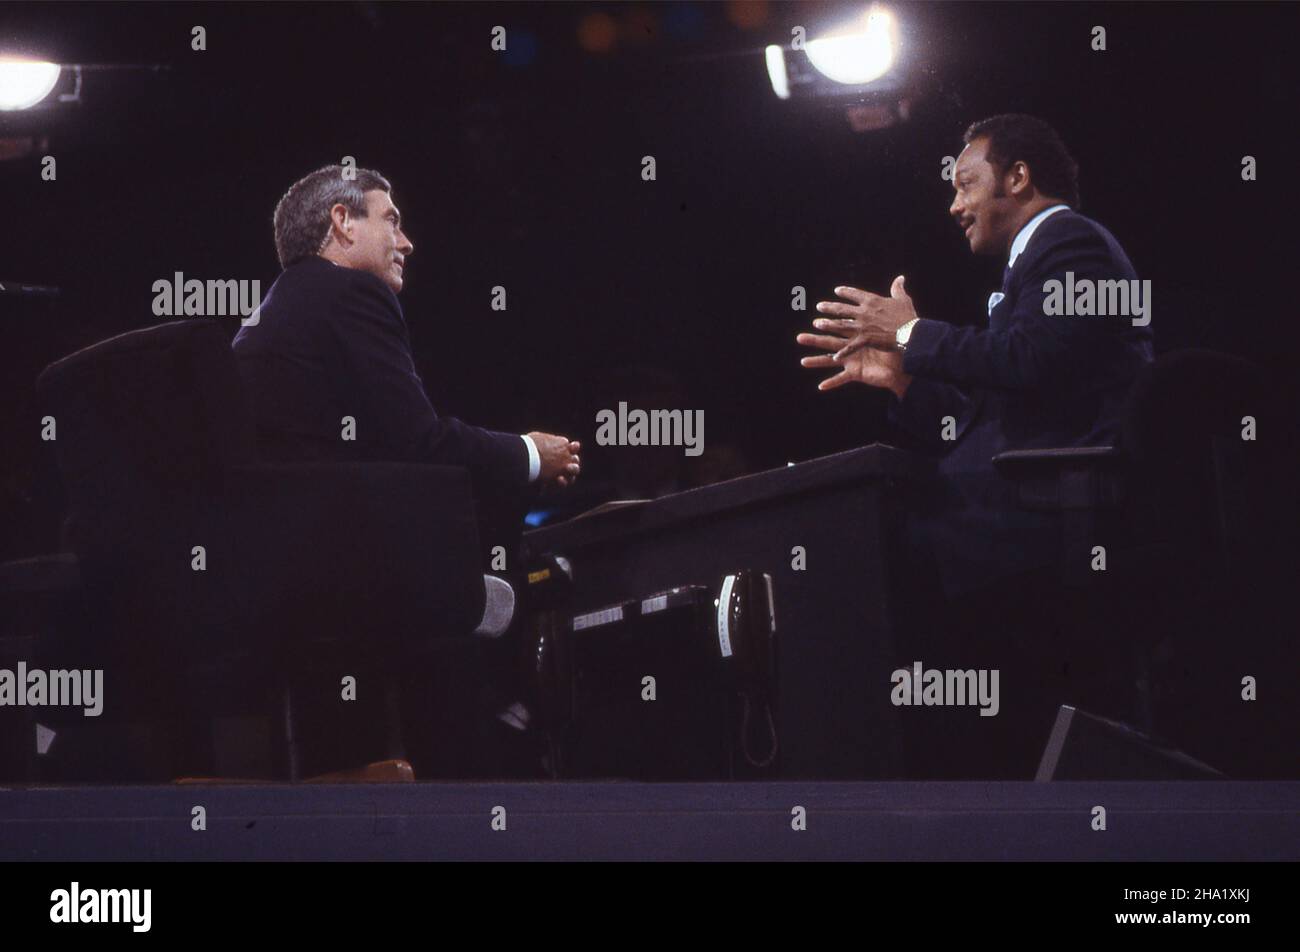 Photographers  in Athens covering Bush 41.  Wally McNamee,Dennis Cook Tim Clary, Gary Hershorn,Diana Walker, Dennis Brack,Charles Arbushaw  Dan Rather in the CBS anchor booth interviewing Rev. Jesse Jacksopnm at  the 1988 Democratic Convention.Photograph by Dennis Brack. bb80 Stock Photo